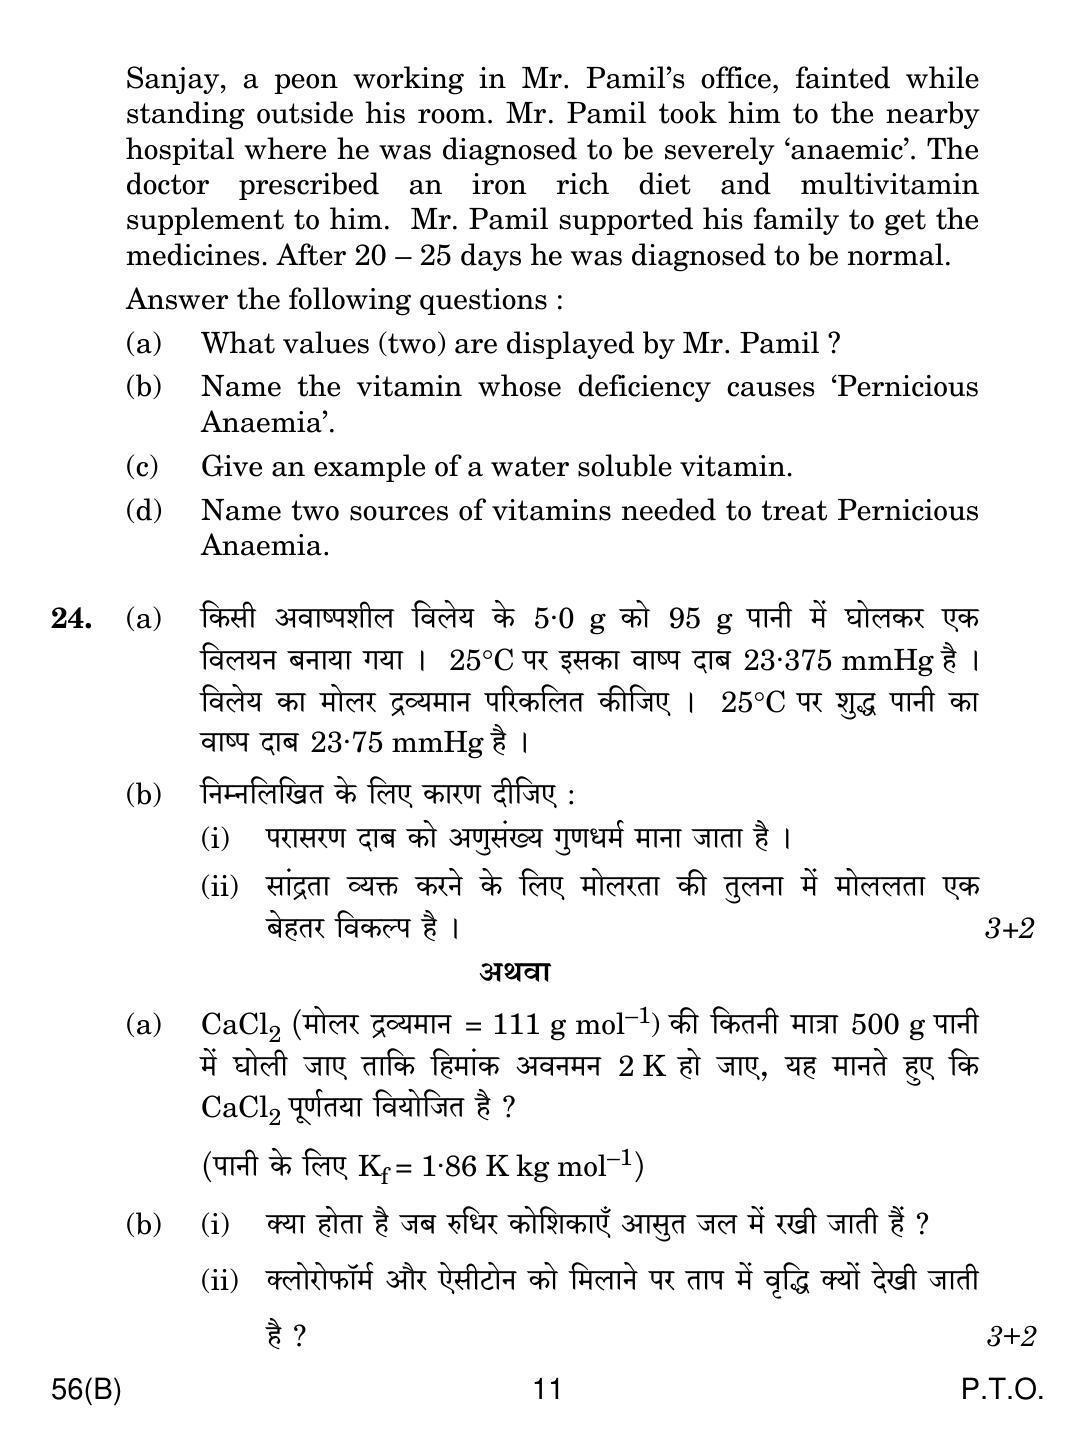 CBSE Class 12 56(B) CHEMISTRY FOR BLIND CANDIDATES 2018 Question Paper - Page 11